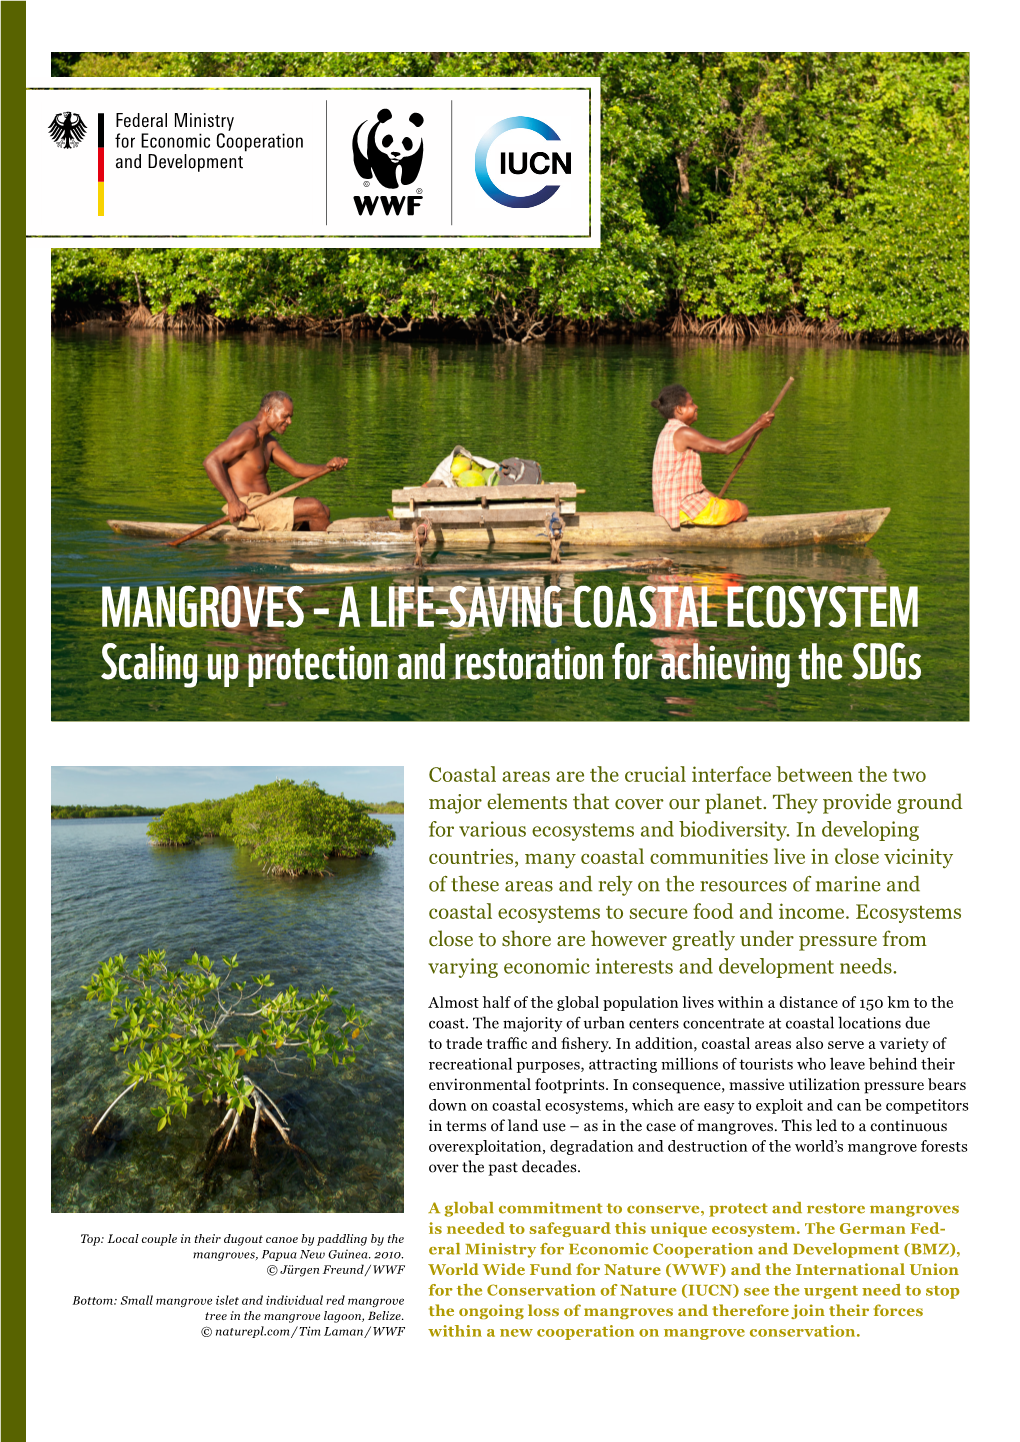 MANGROVES – a LIFE-SAVING COASTAL ECOSYSTEM Scaling up Protection and Restoration for Achieving the Sdgs